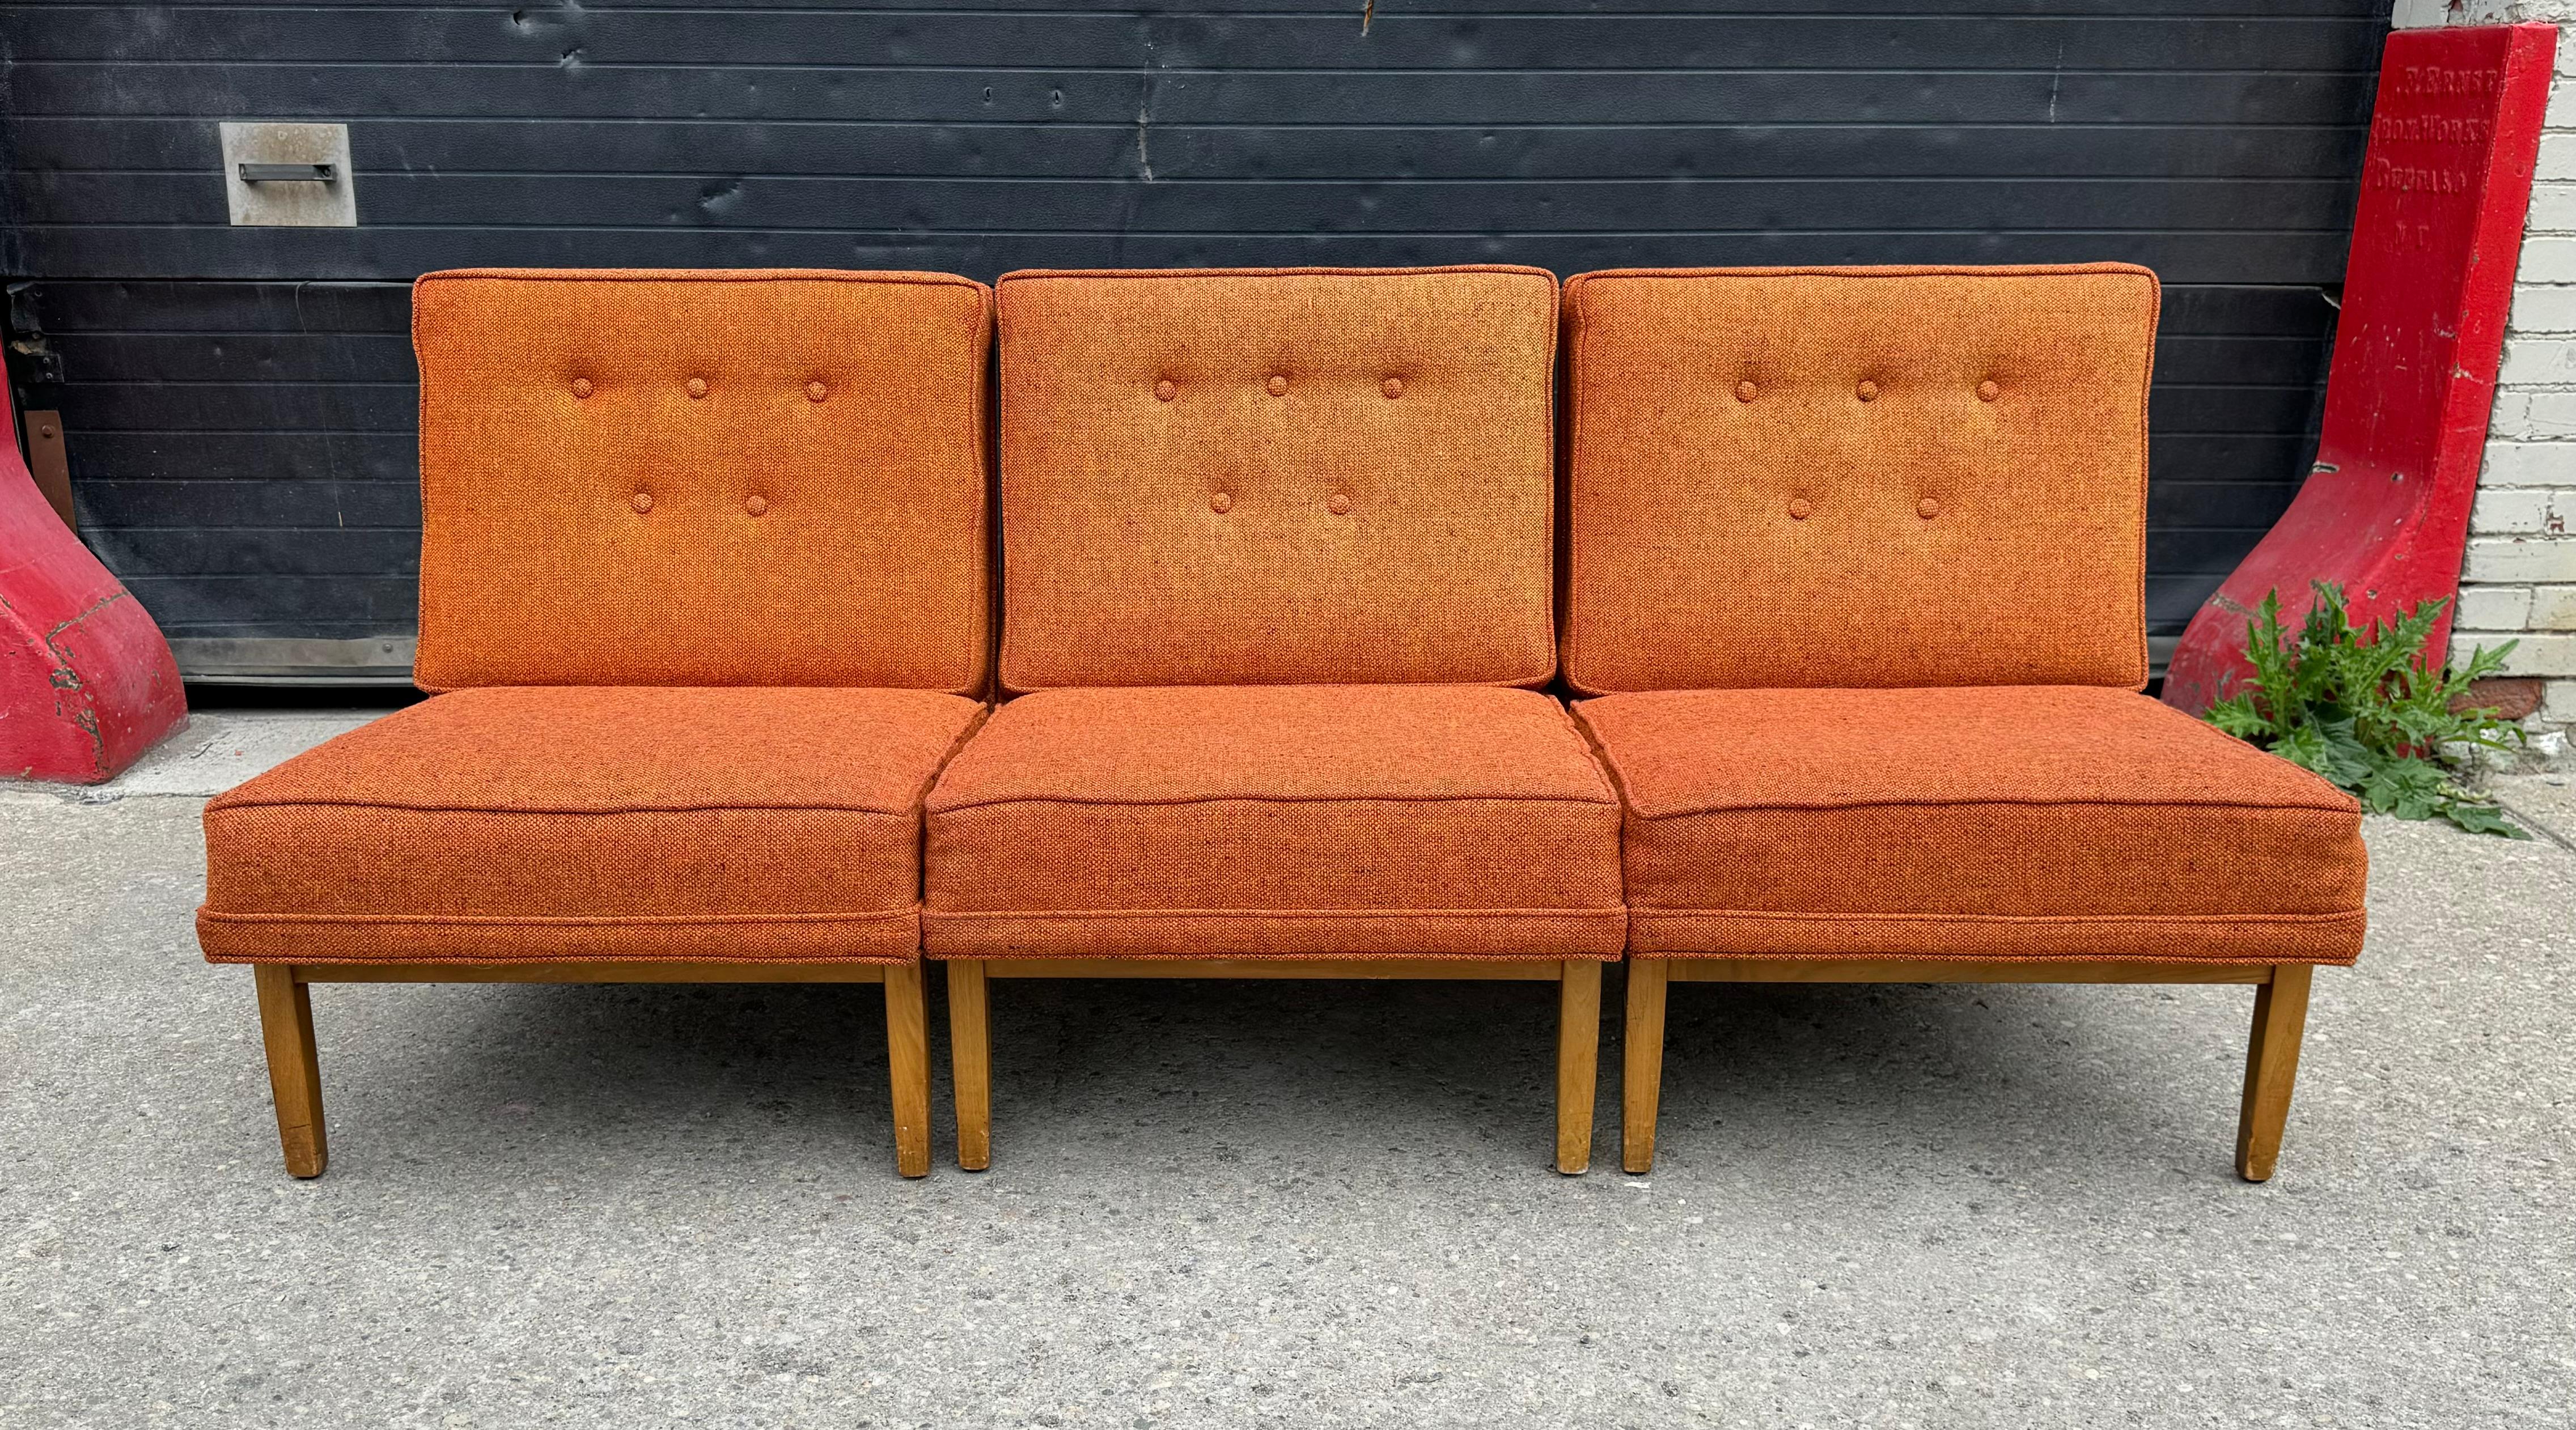 Set 3 Florence Knoll Slipper /LOUNGE  Chairs ,, Can also be used as a 2 seat sofa with one chair or a 3 seat sofa. Classic Mid Century Modern Design, Retain original fabric, Age appropriate wear, Hand delivery avail to New York City or anywhere en